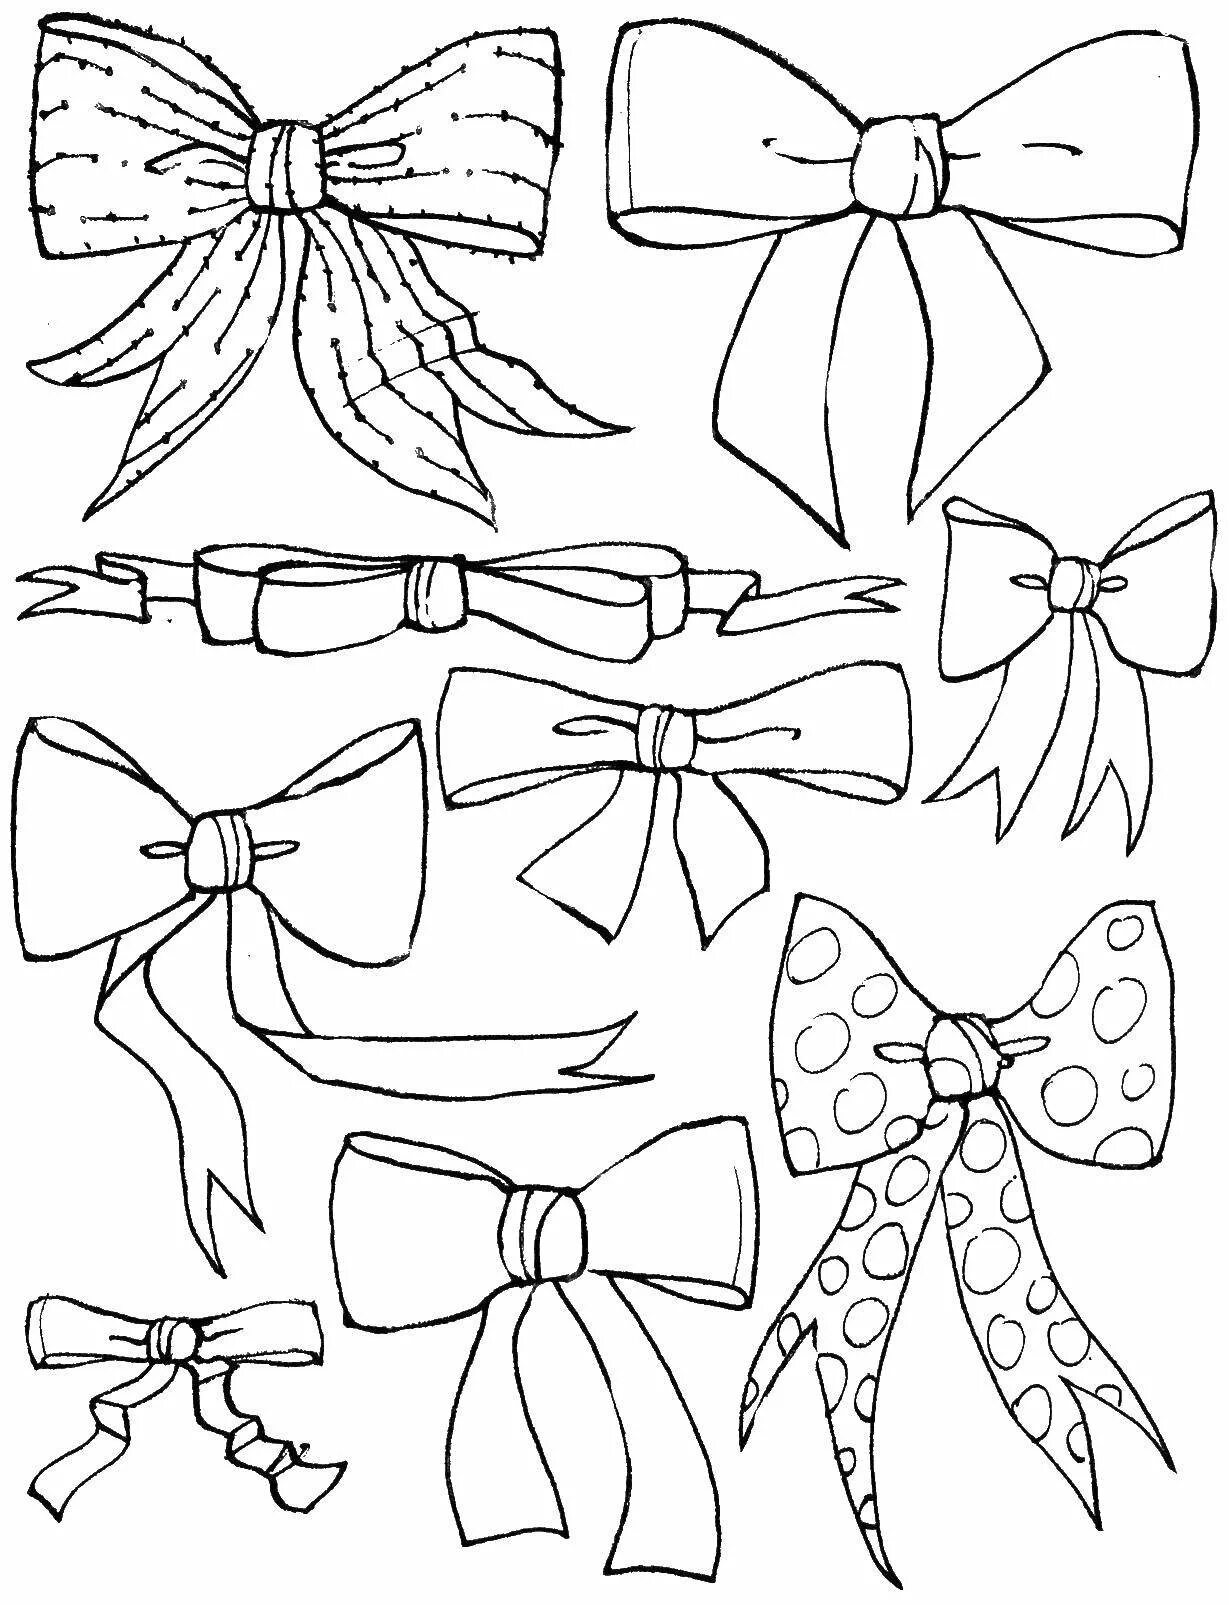 Creative bow coloring for preschoolers